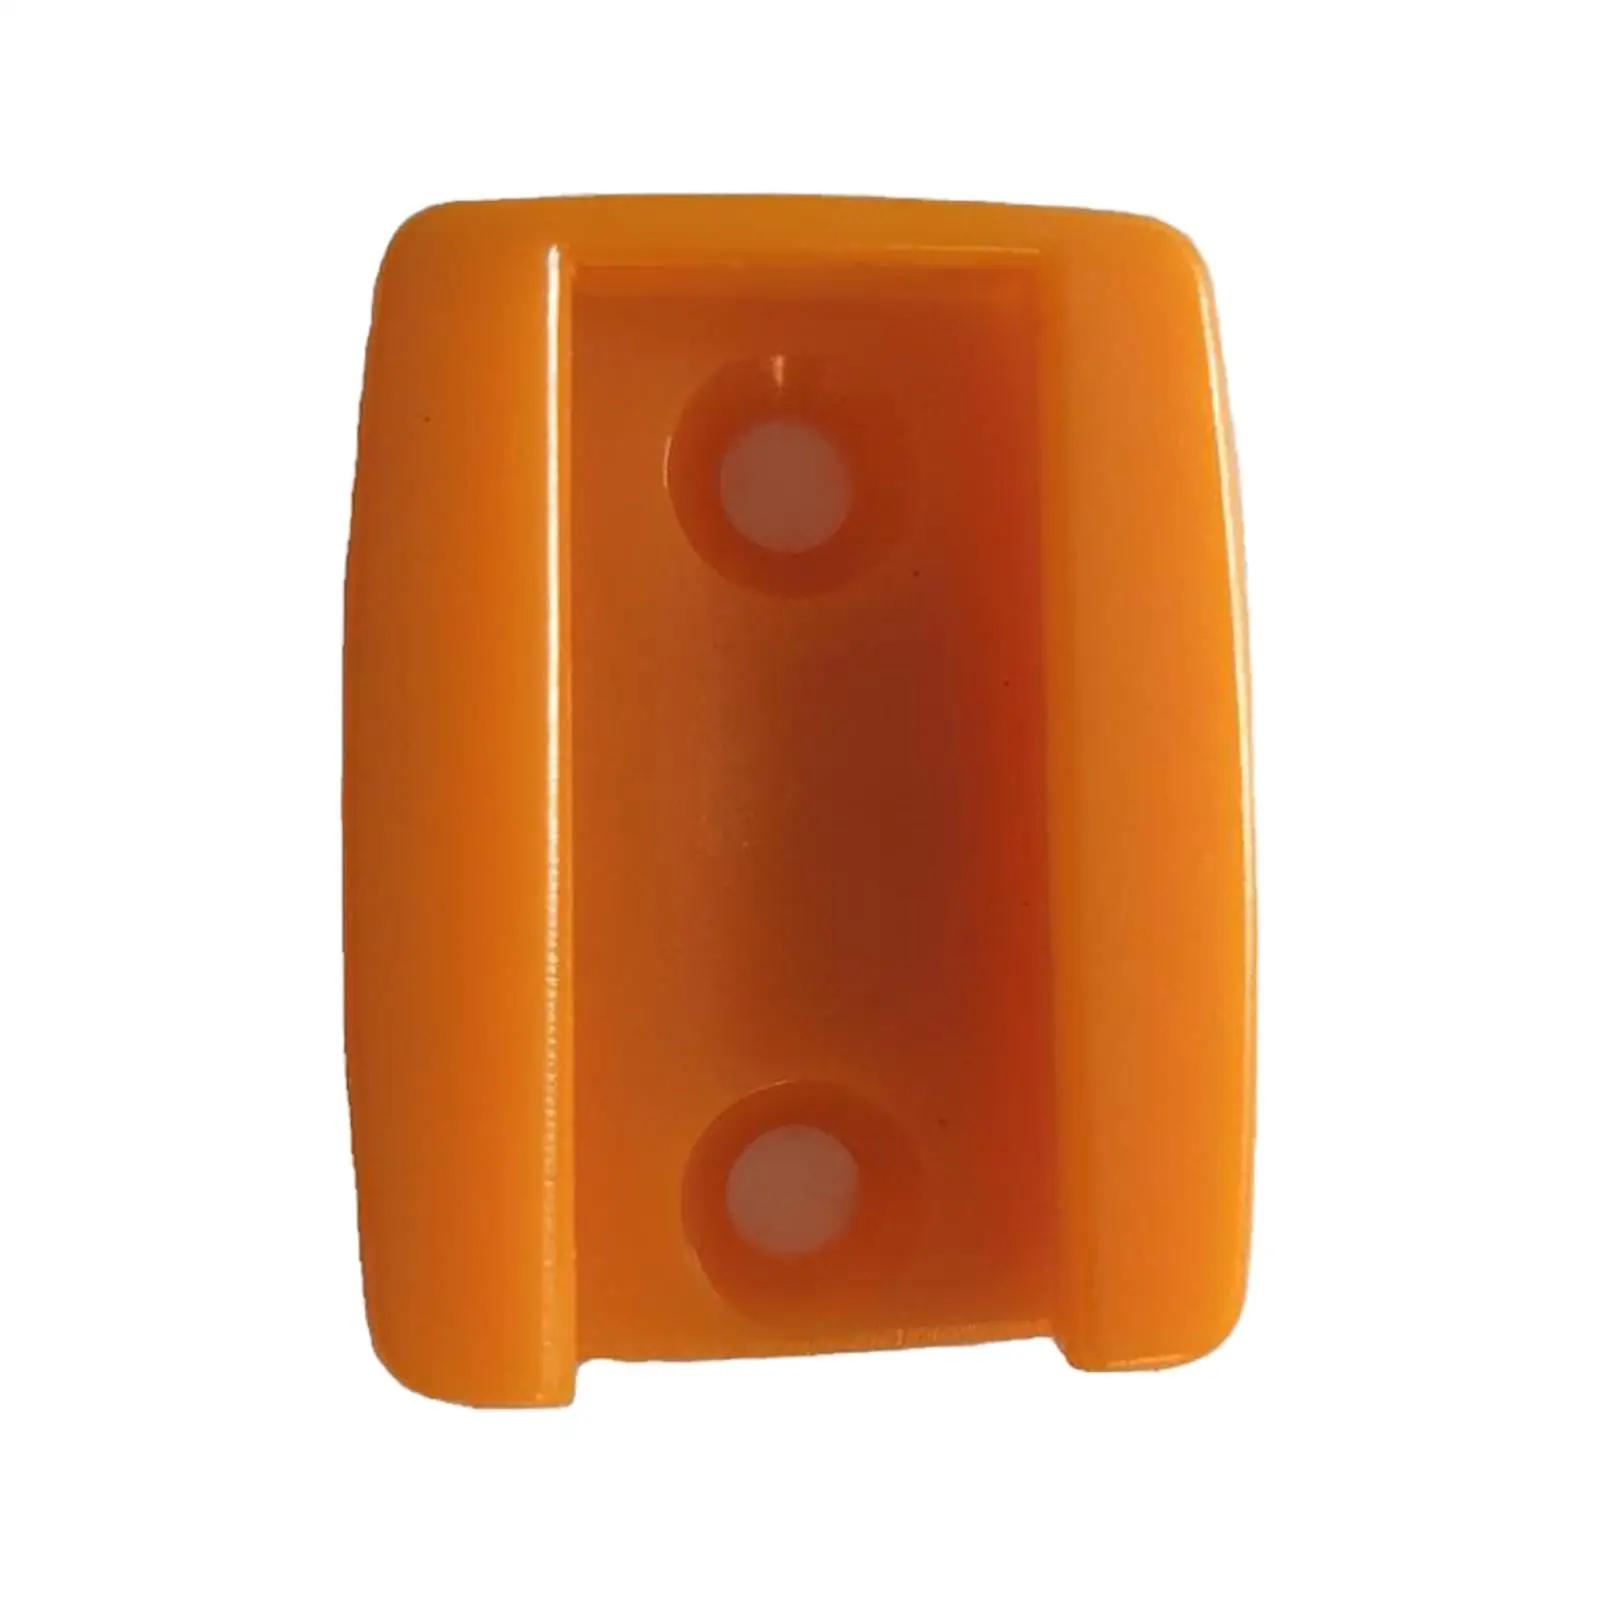 Orange Juicer Parts Holder Commercial and Electric Juicer Parts Electric Orange Juicer Parts Fixing Accessories for XC-2000E